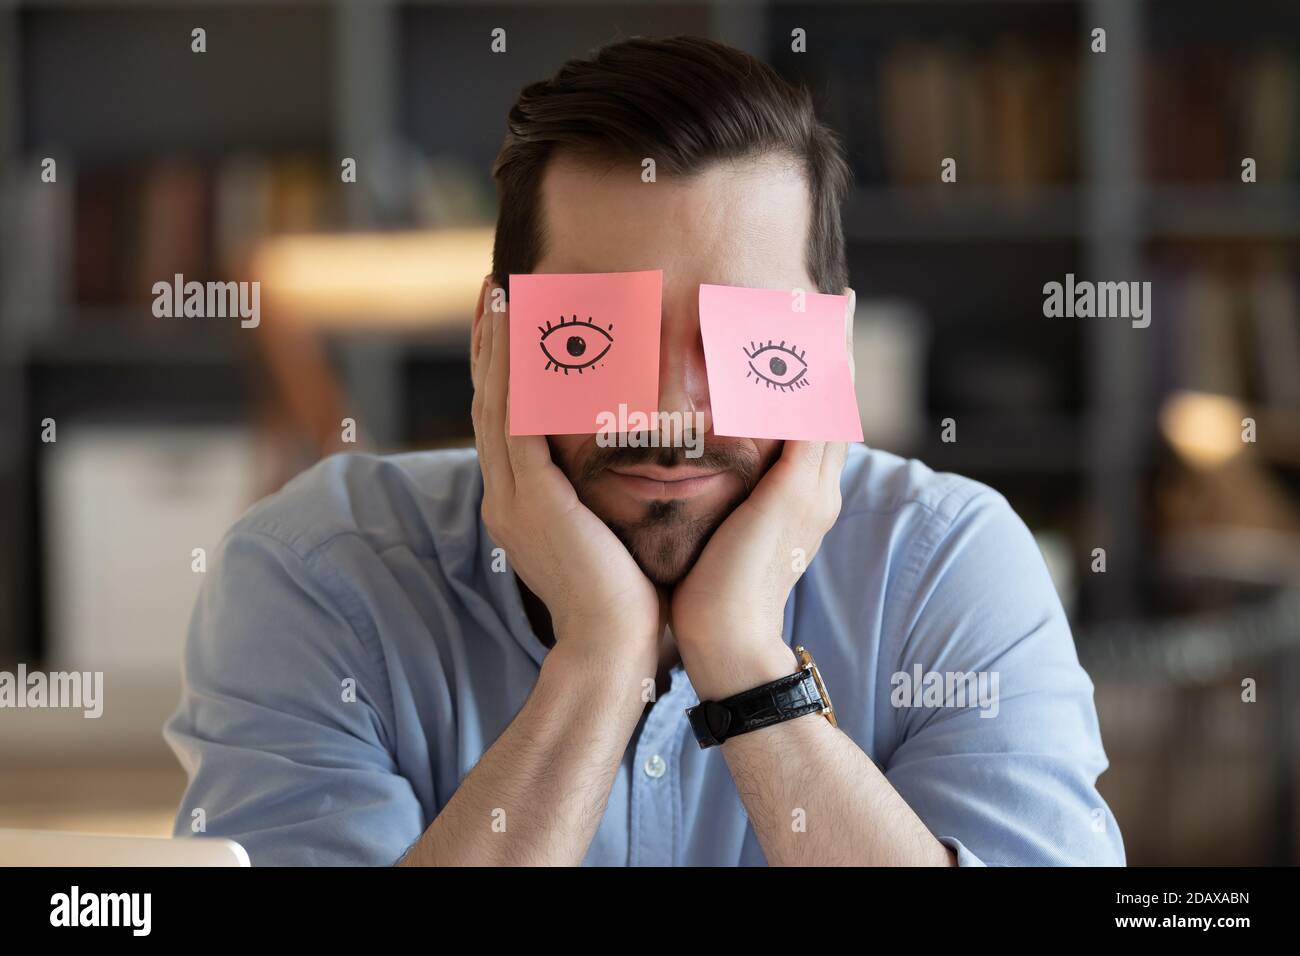 Employee hides eyes with sticky notes wants sleep at workplace Stock Photo